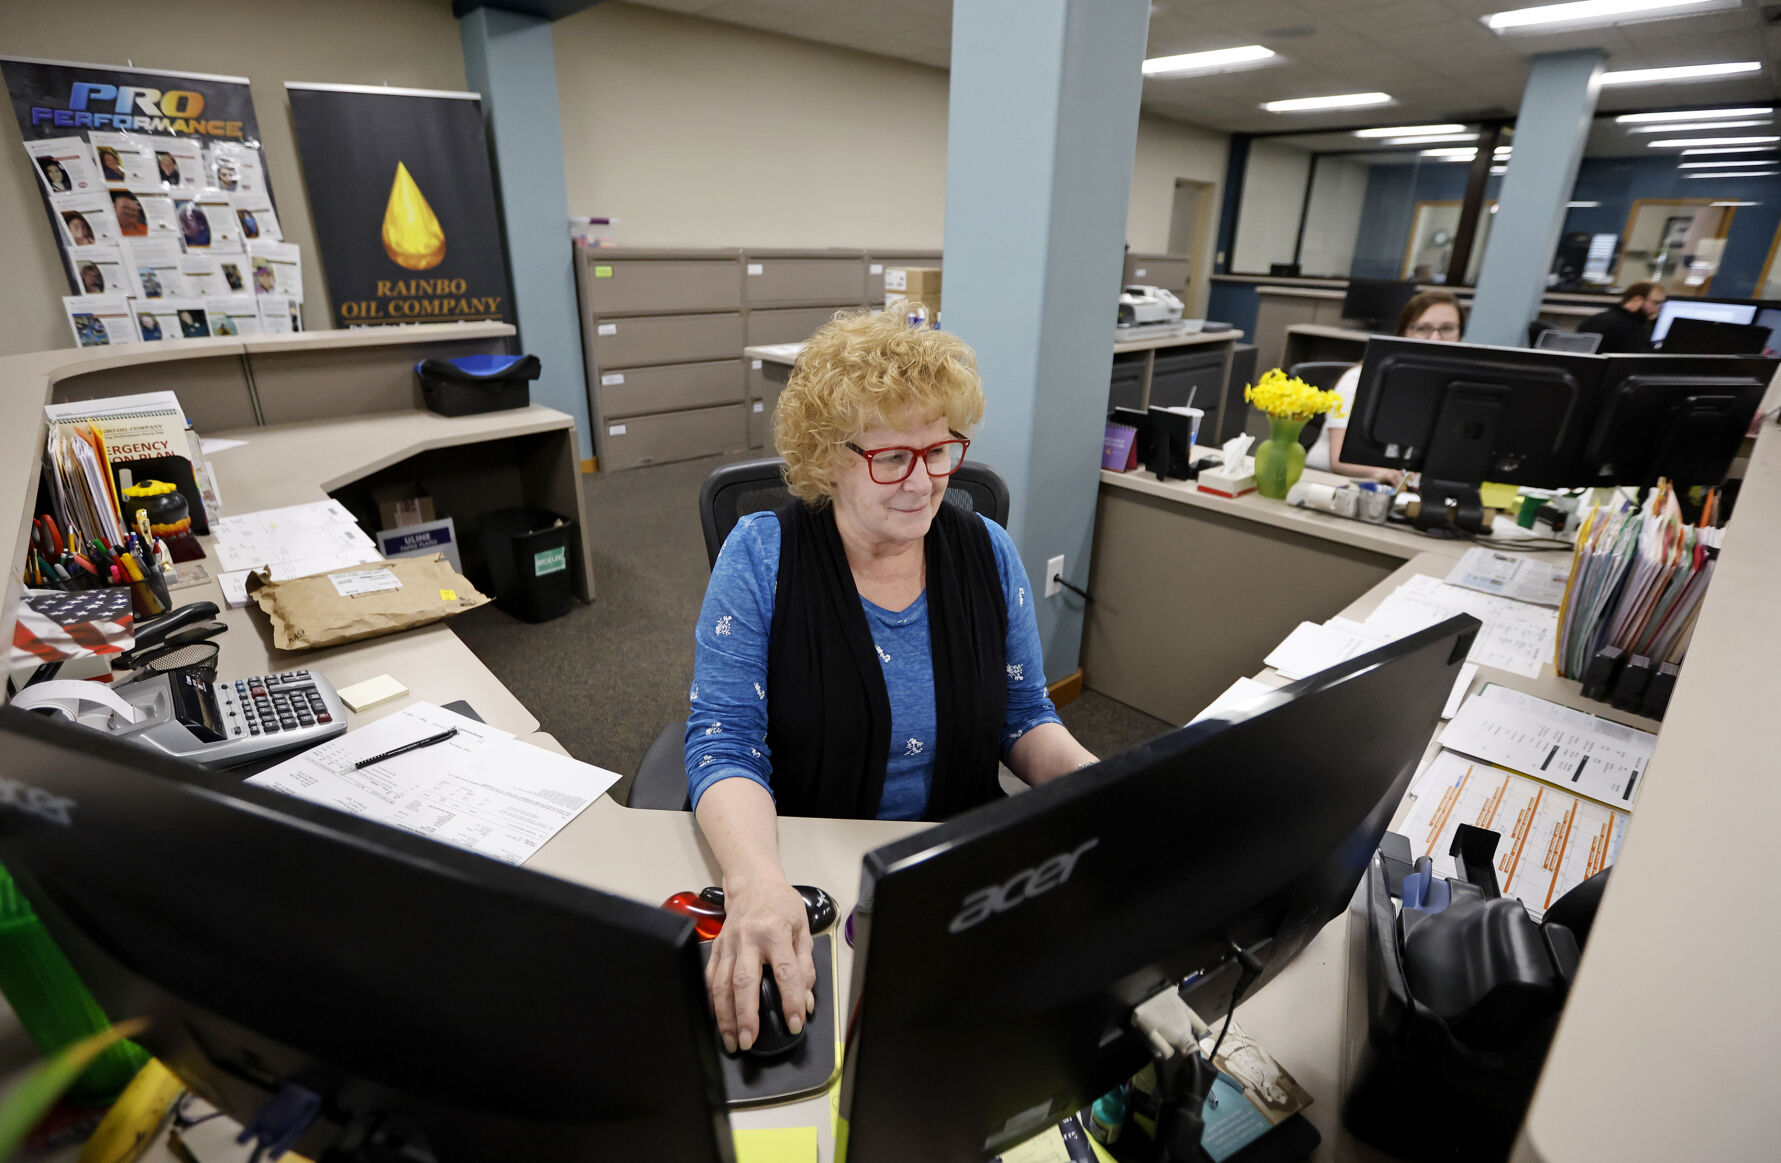 Kathy Green works on the computer at Rainbo Oil Co. in Dubuque on Tuesday, May 16, 2023.    PHOTO CREDIT: JESSICA REILLY
Telegraph Herald